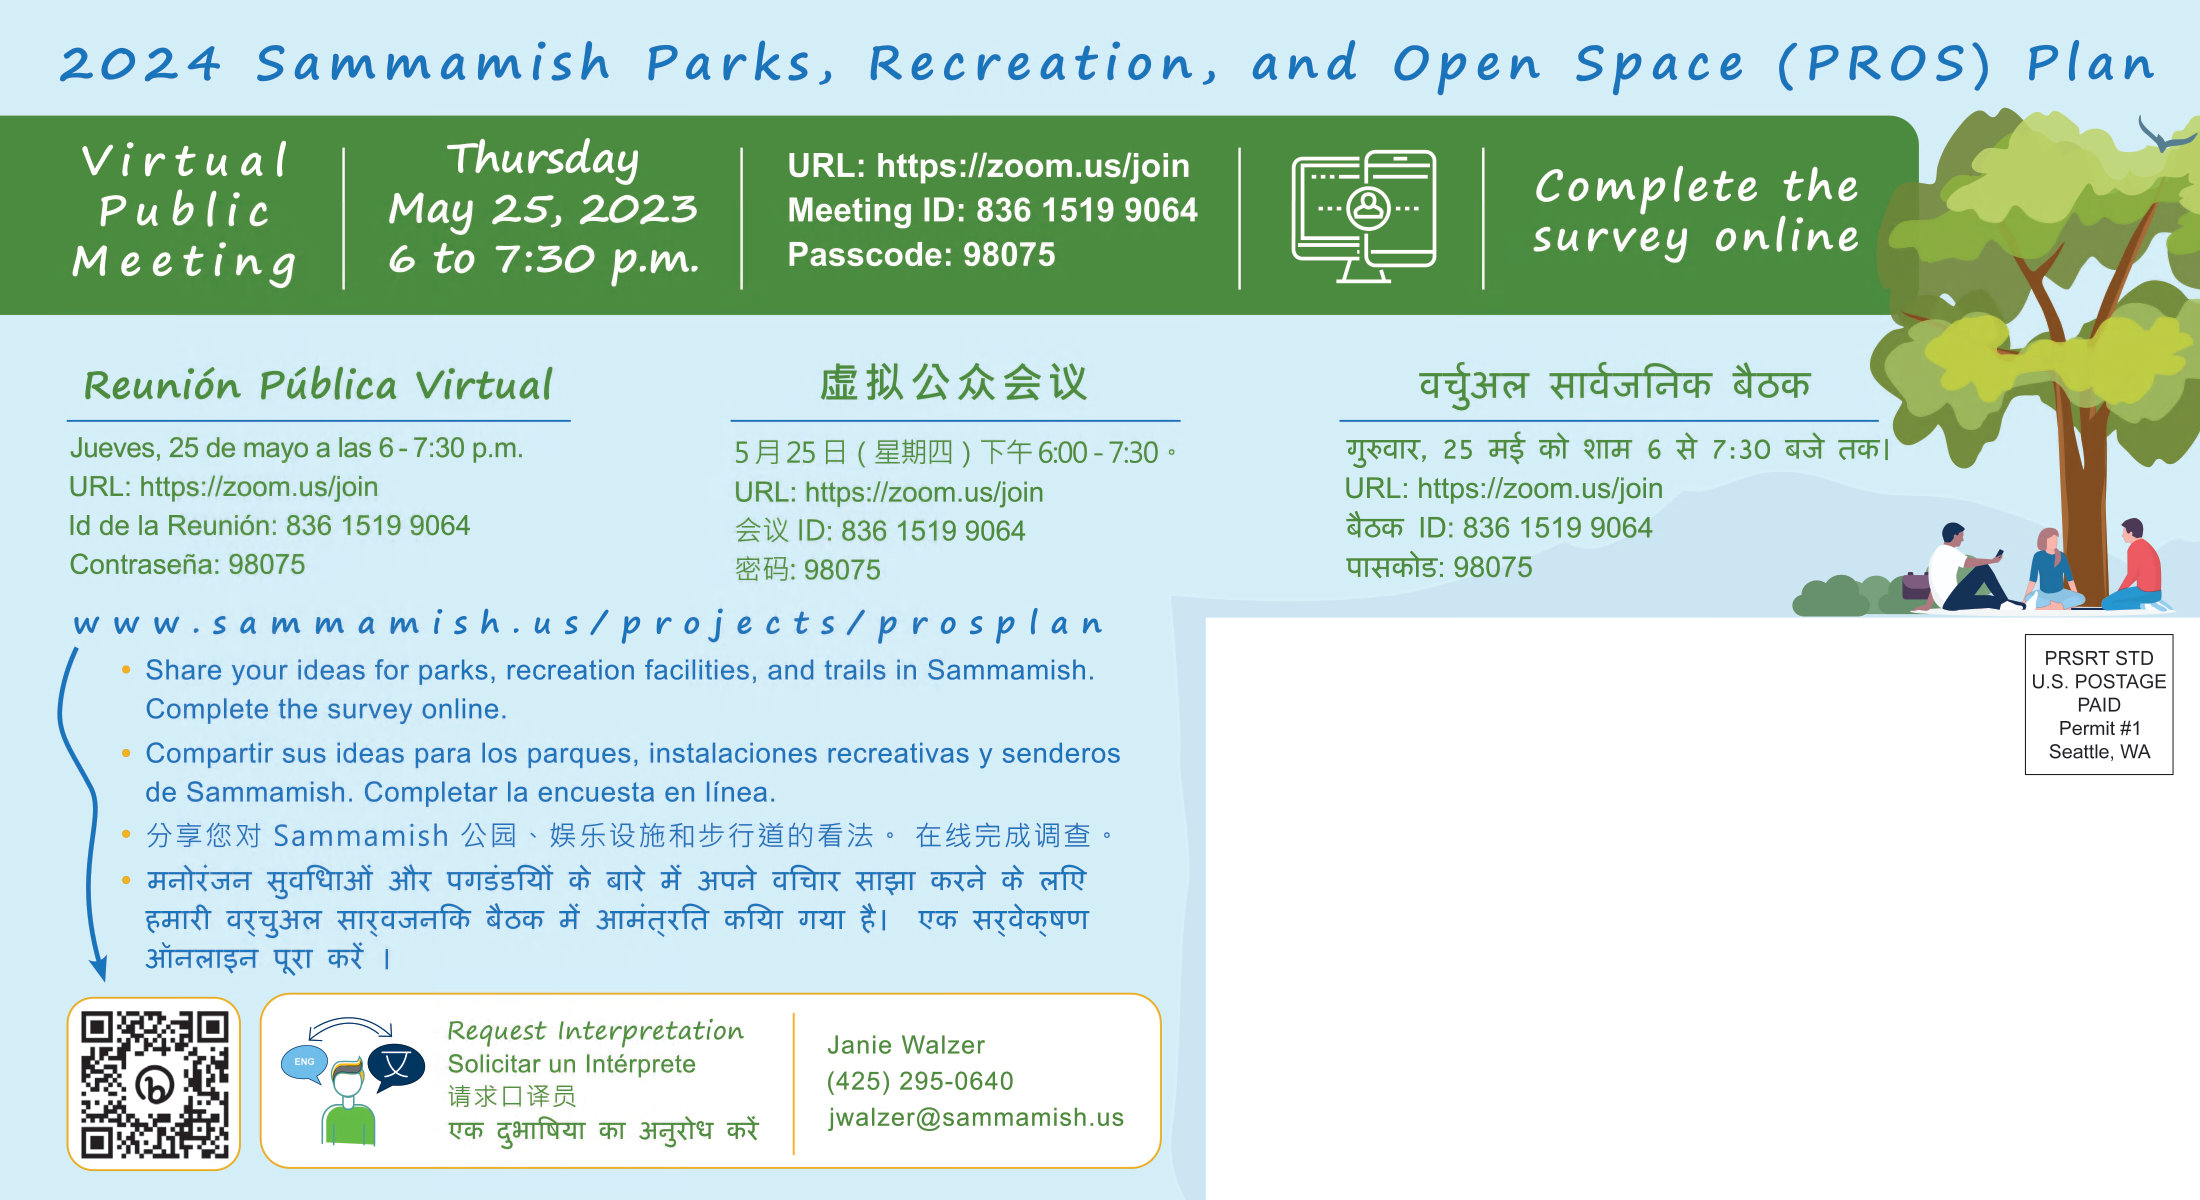 Copy of postcard invitation. 2024 Sammamish Parks, Recreation, and Open Space (PROS) Plan. Virtual Public Meeting. Thursday May 25, 2023 6 to 7:30 p.m. URL: https://zoom.us/join Meeting ID: 836 1519 9064 Passcode: 98075. Complete the survey online. Same information translated in Spanish, Chinese and Hindi. www.sammamish.us/projects/prosplan -share your ideas for parks, recreation facilities, and trails in Sammamish. Complete the survey online. Translated into Spanish, Chinese, and Hindi.